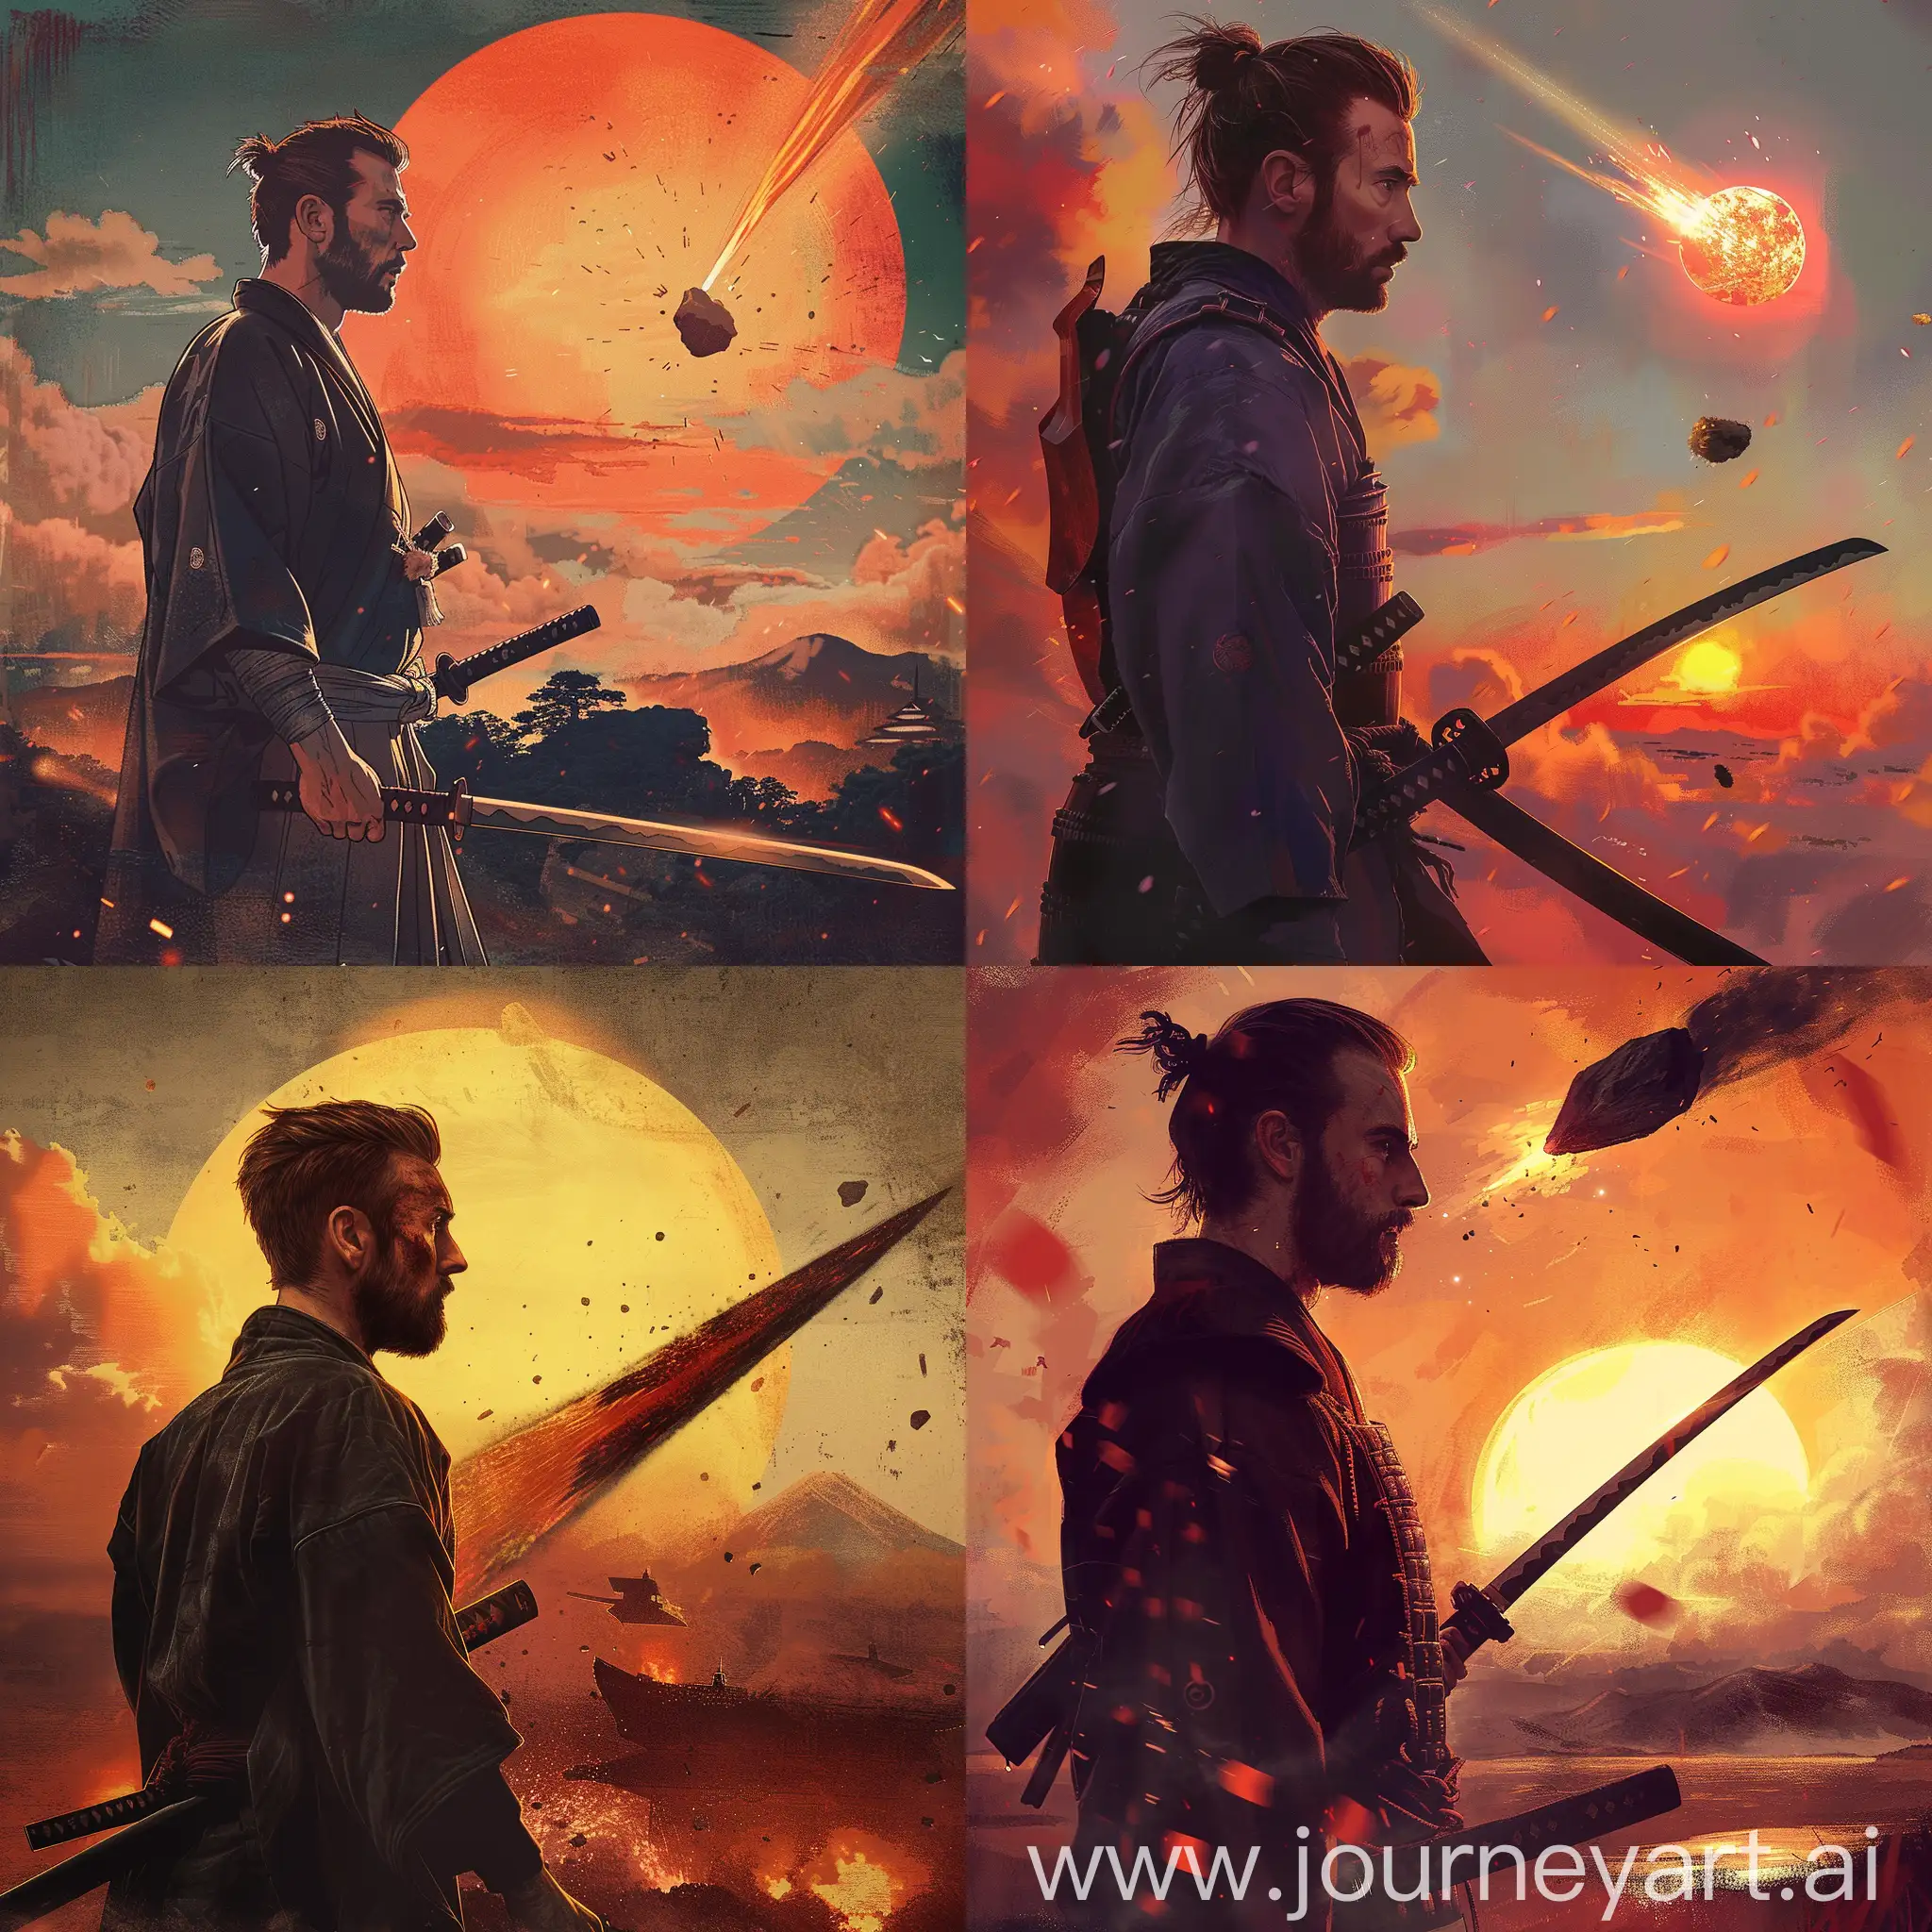 Chris Evans is a samurai, standing in front of the rising sun, looking at a falling meteorite, holding a katana in his hand.